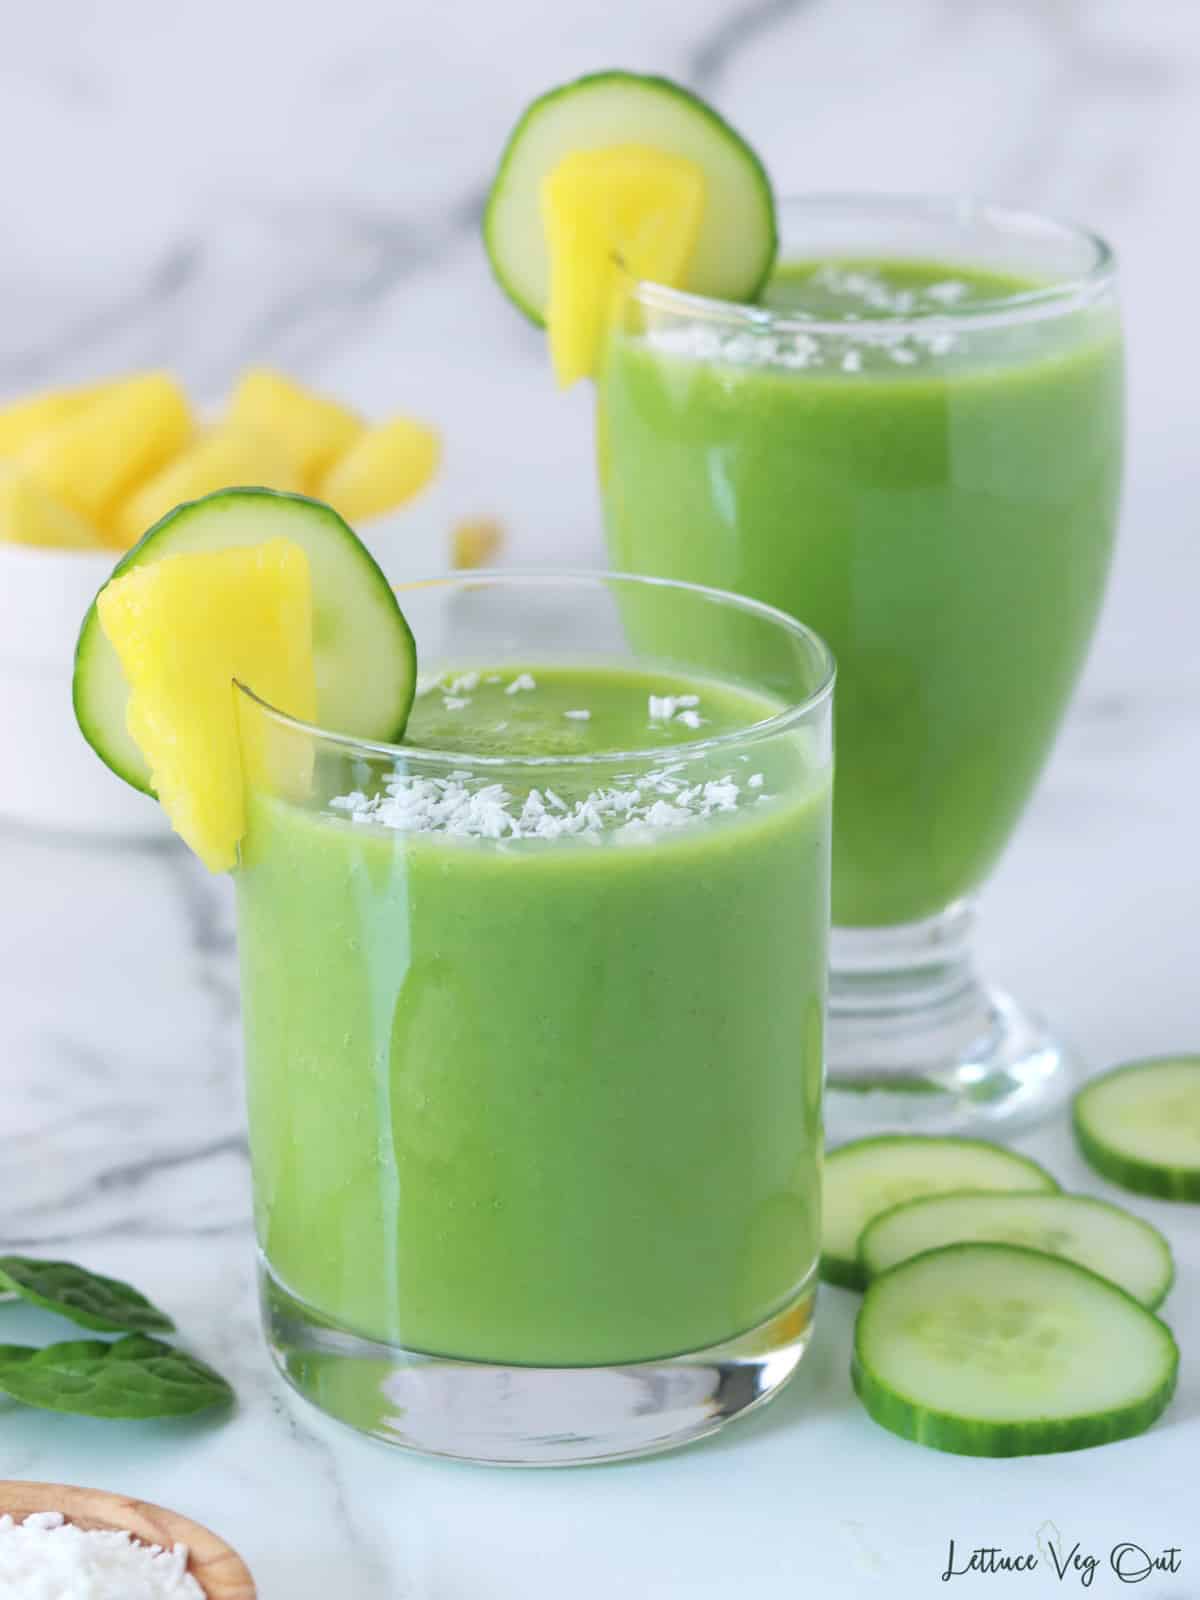 Two glasses of pineapple green smoothie with cucumber slices and a bowl of pineapple decorating around glasses.